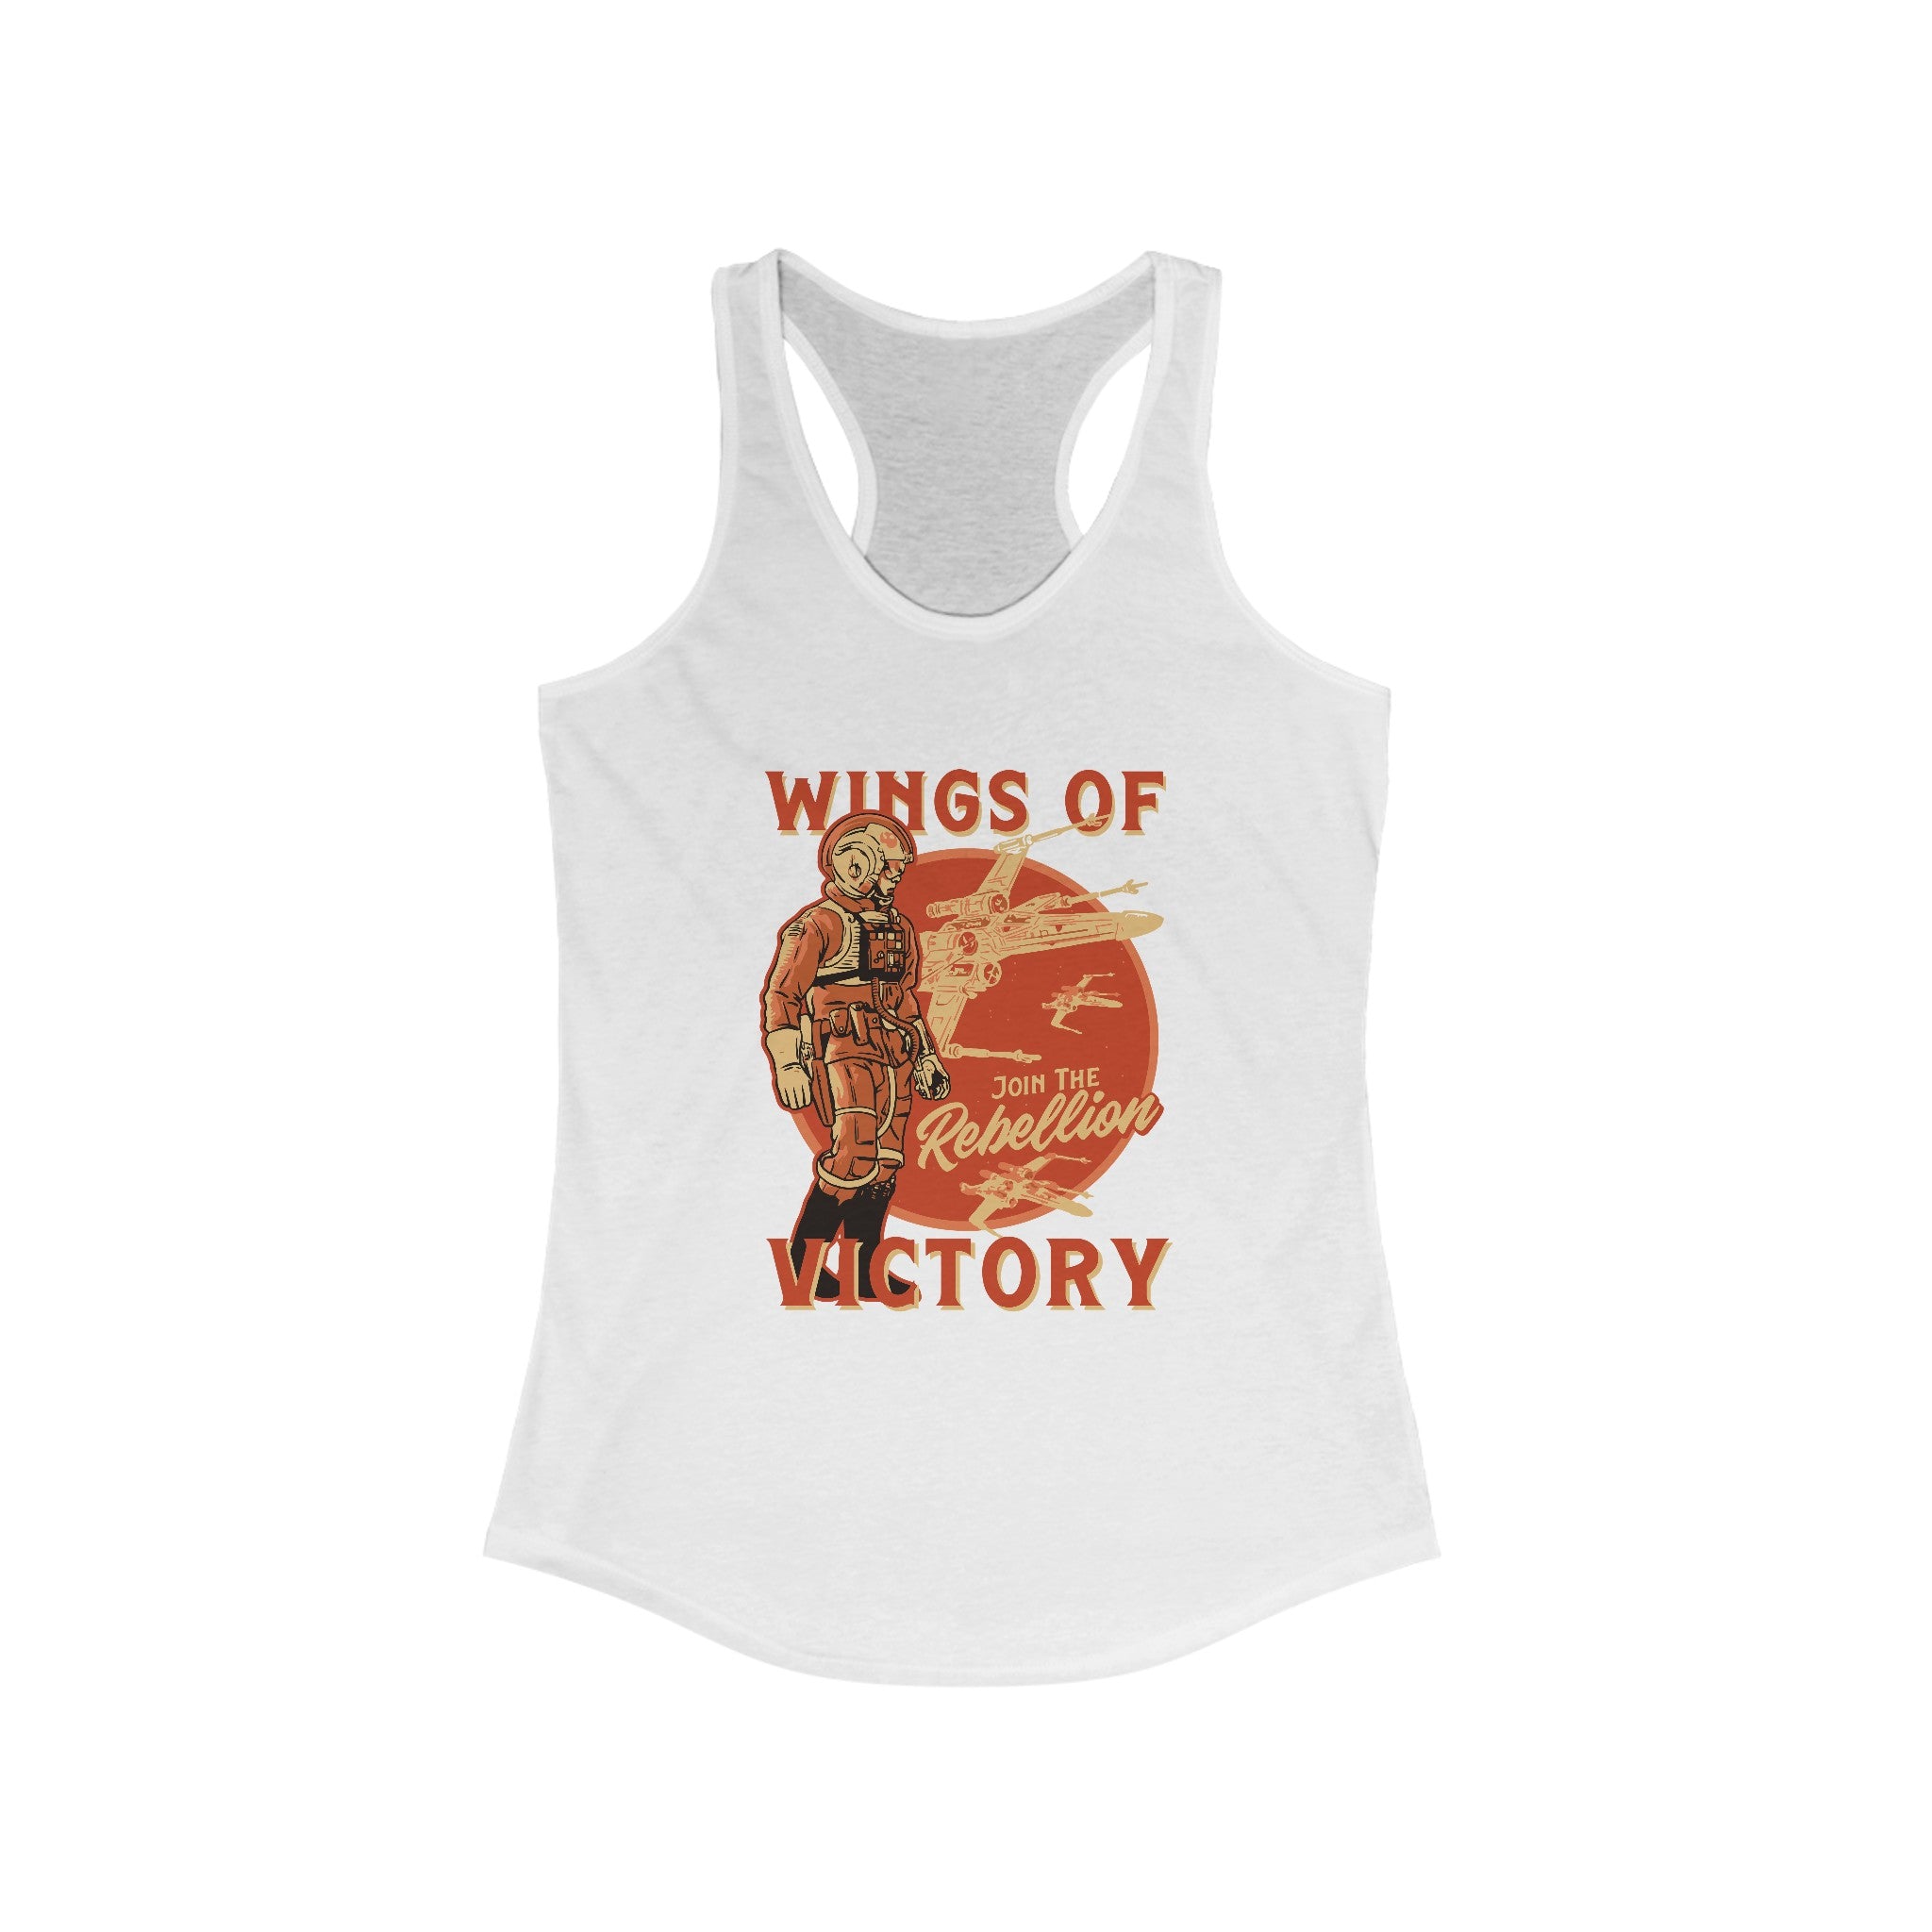 Wings of Victory - Women's Racerback Tank in white, showcasing a vintage-style illustration of a pilot and the text "Wings of Victory, Join the Rebellion." Perfect for active living.